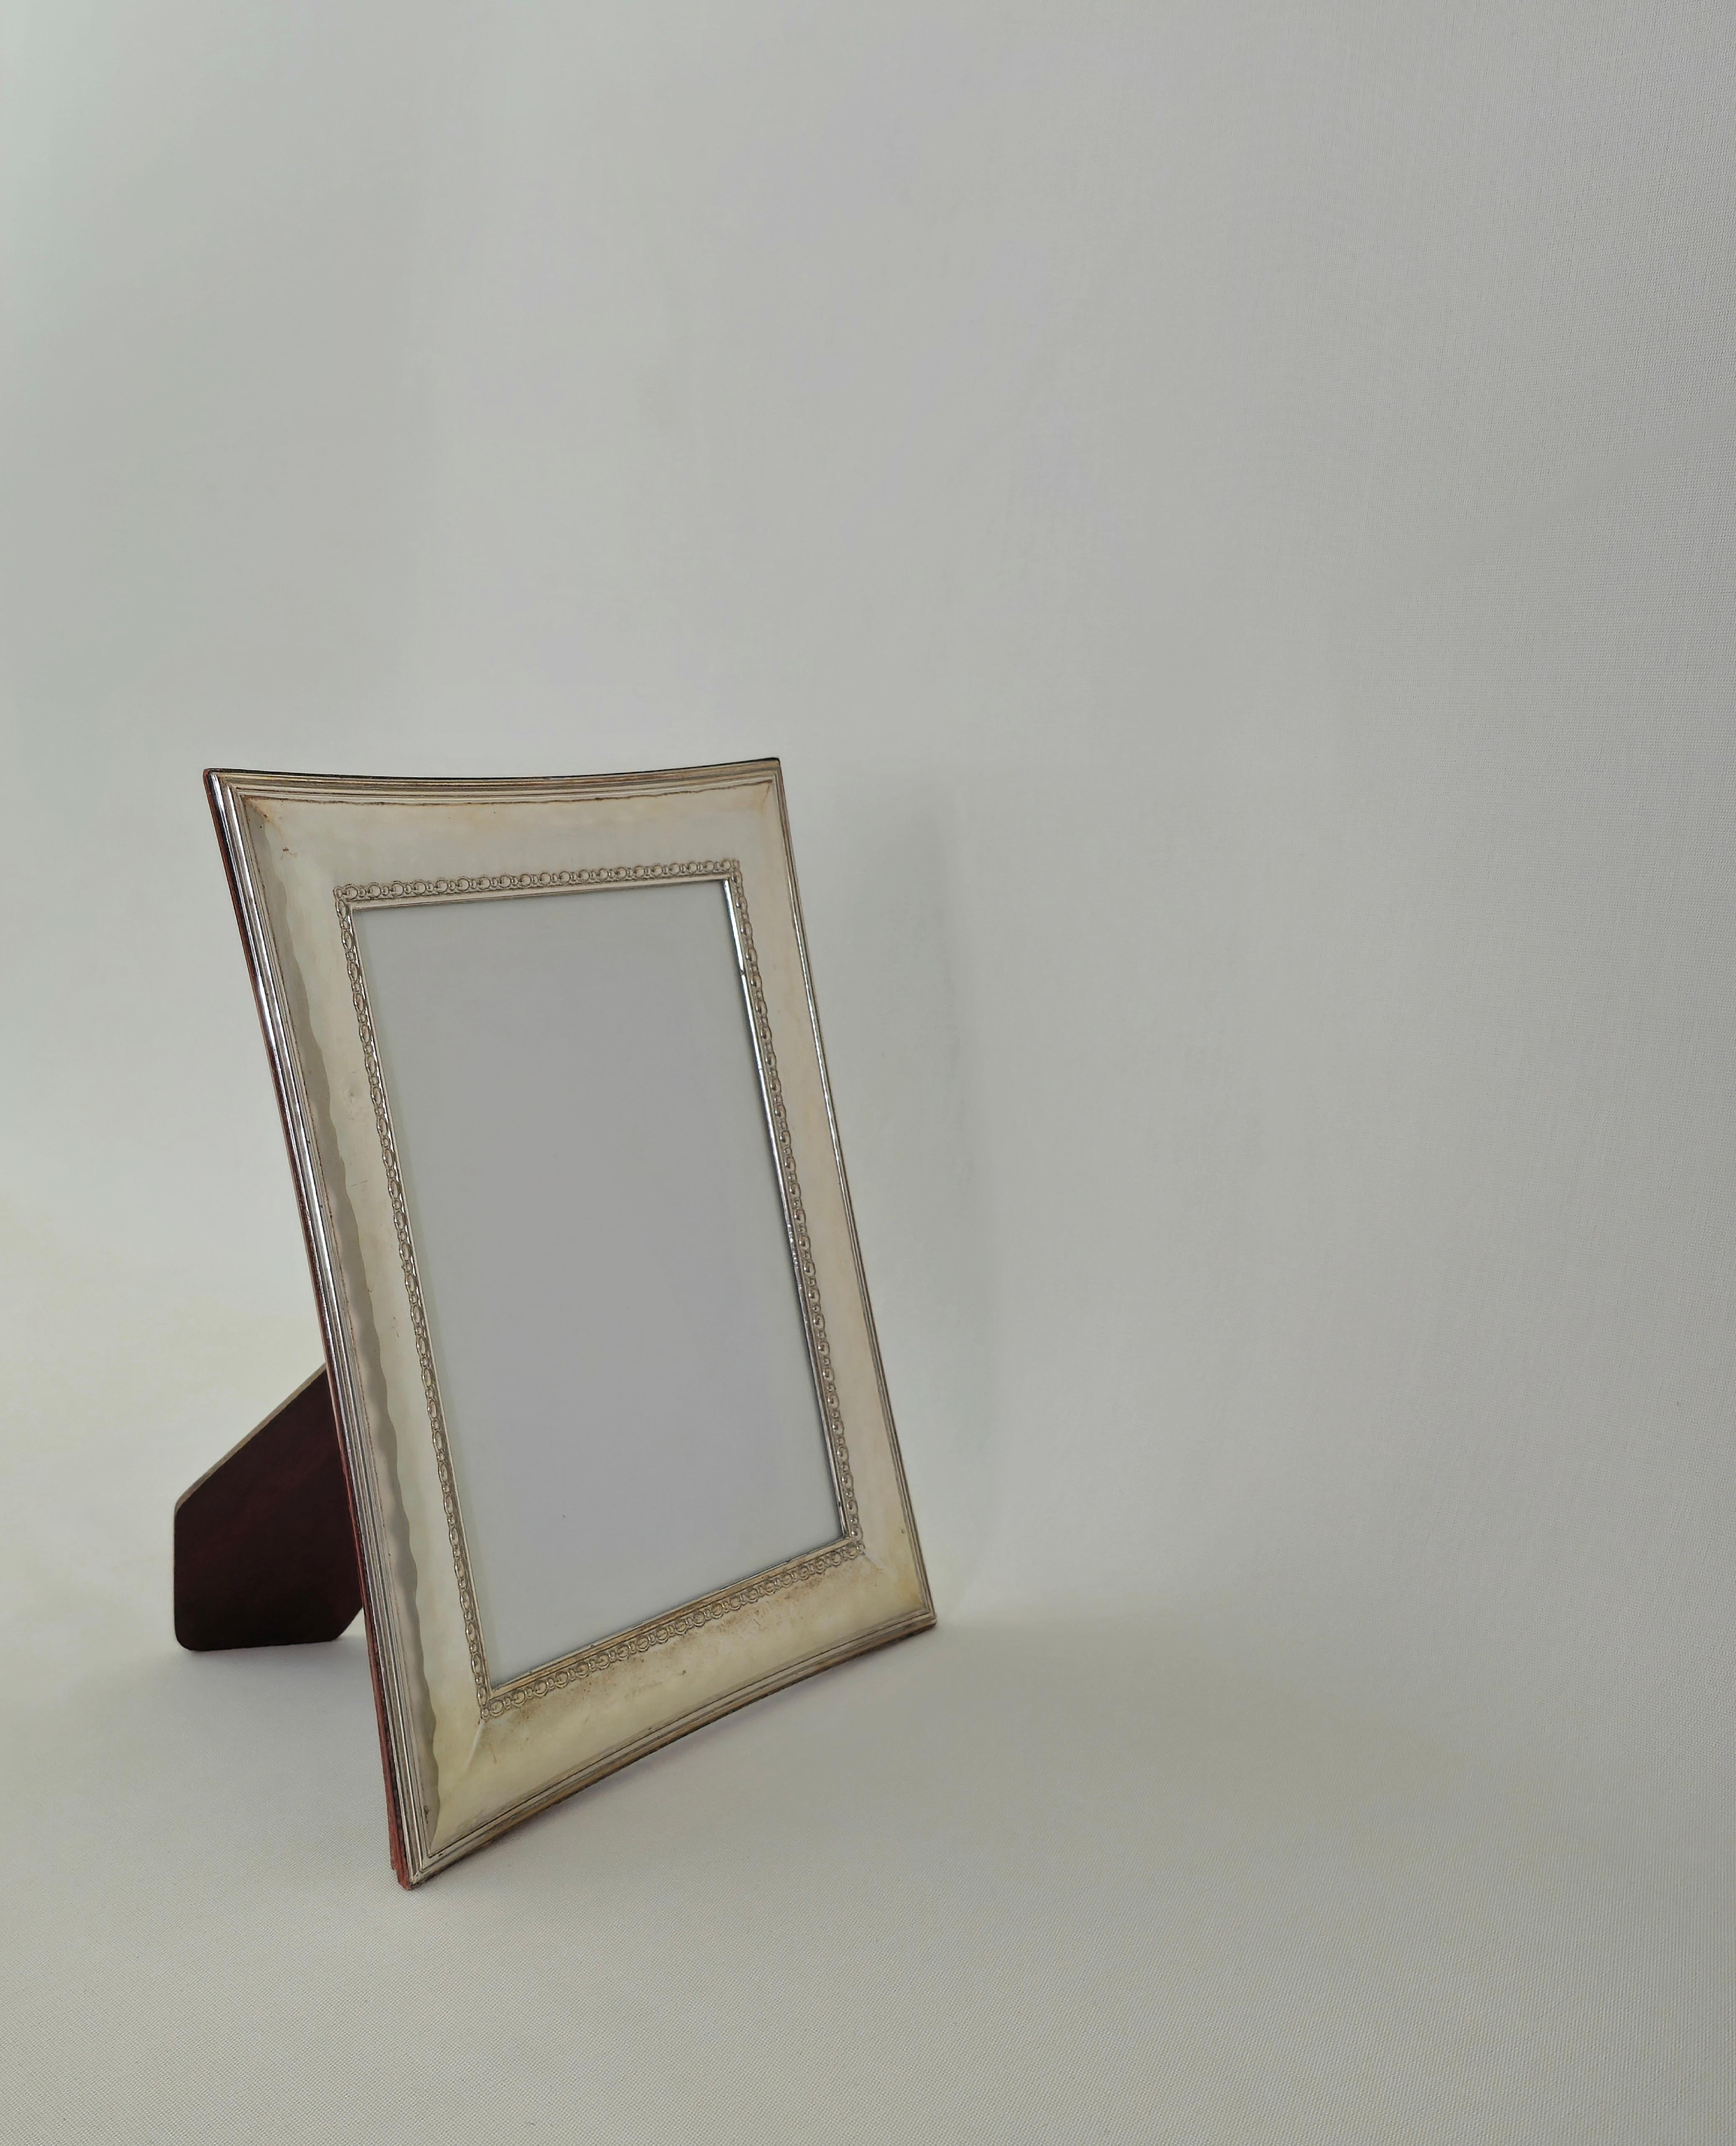 Post-Modern Decorative Object Picture Frame Silver Leaf Wood Postmodern Italian Design 1990s For Sale